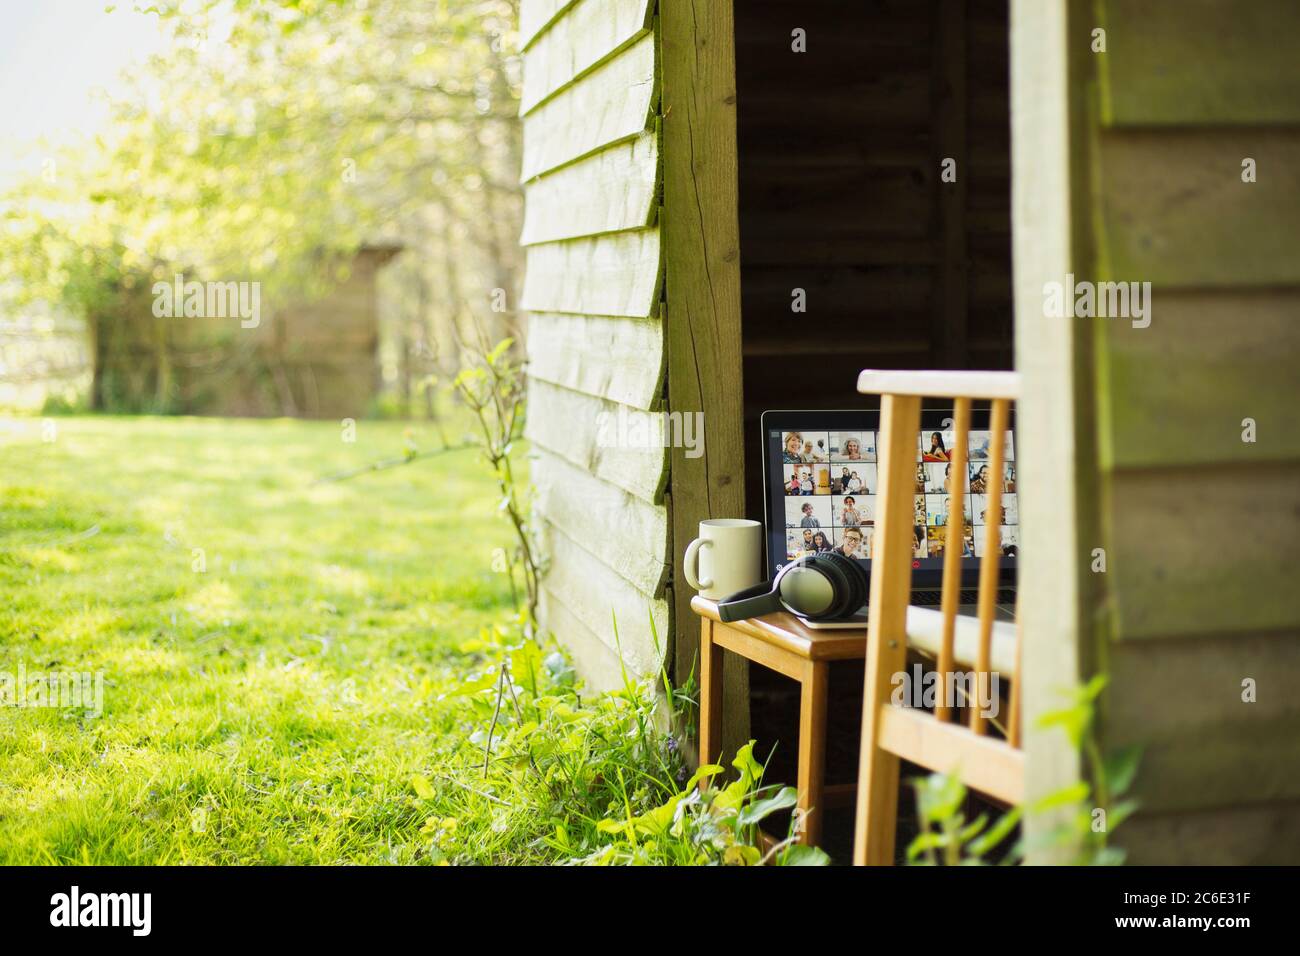 Friends video chatting on laptop screen in sunny garden shed Stock Photo